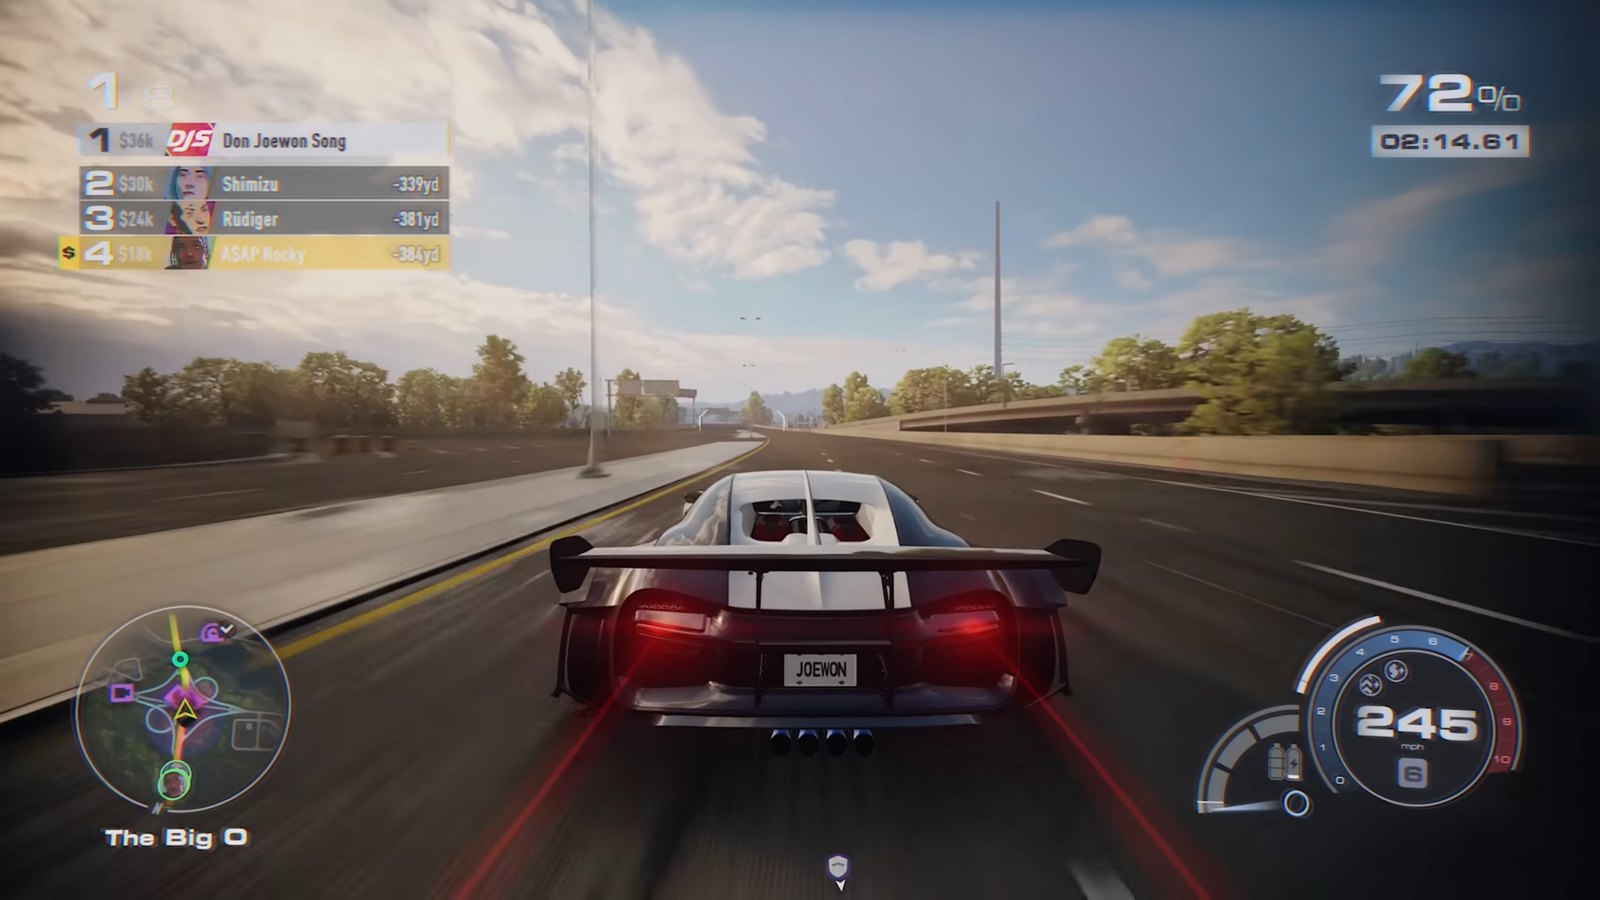 The fastest car build in Need for Speed Unbound